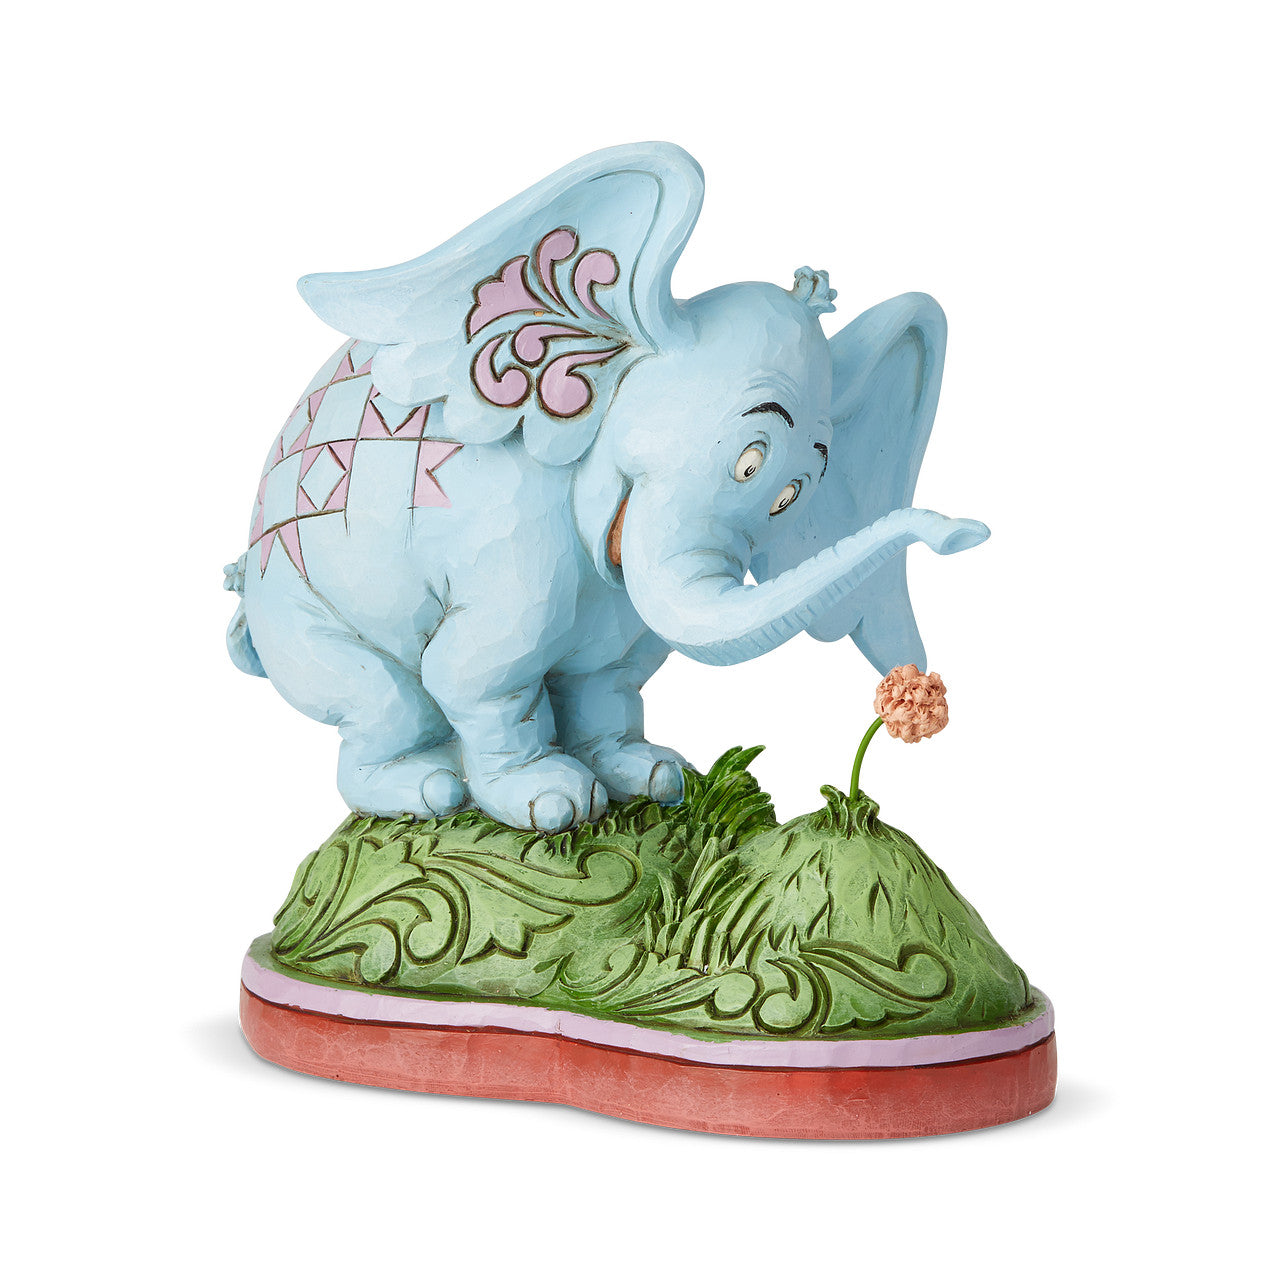 Dr. Seuss Horton Hears A Who Figurine  The mayor of Whoville calls fellow Whos to save their community! In the beloved children's tale Horton Hears a Who, every voice counts in making a difference.